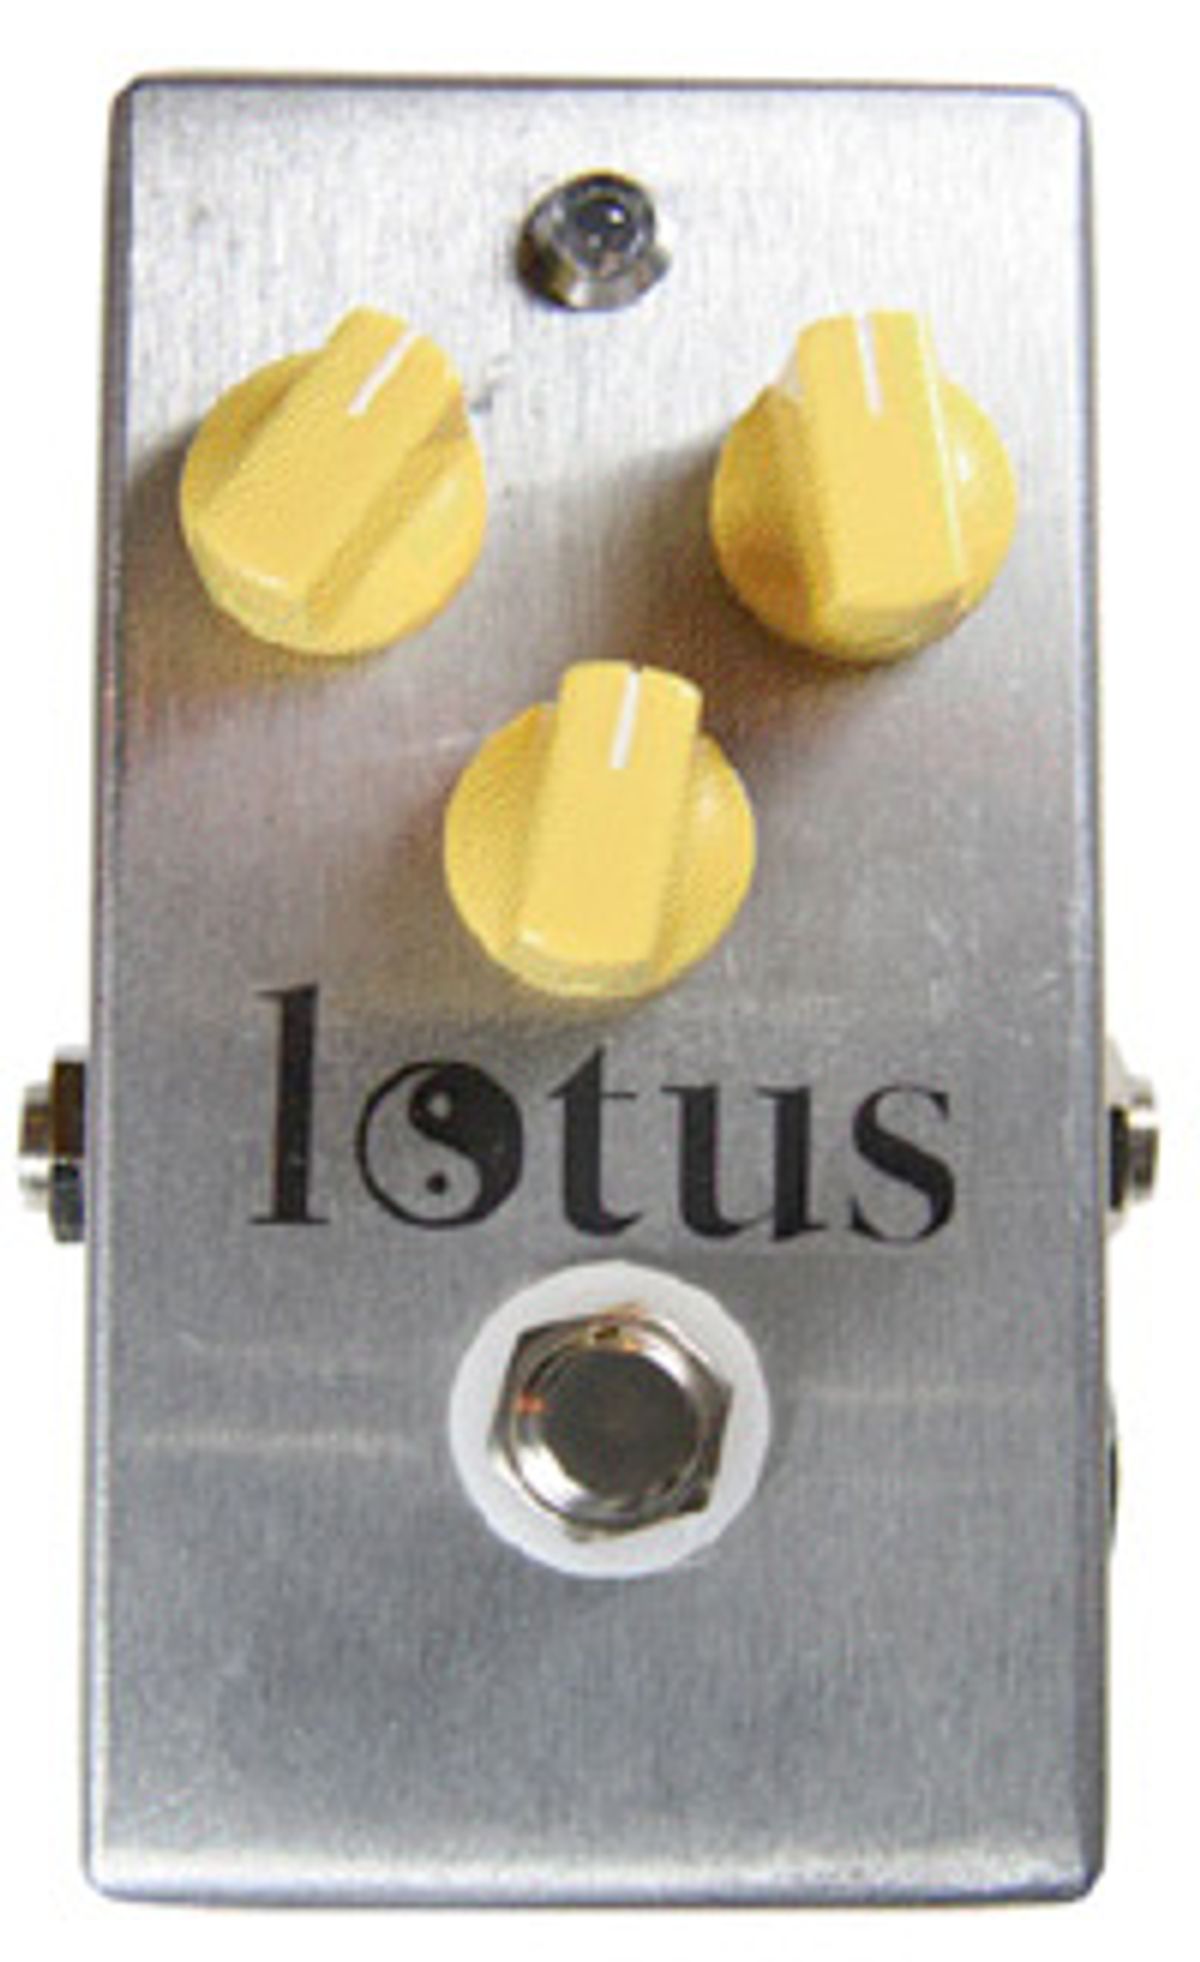 Lotus Introduces Yellow Delay Pedal